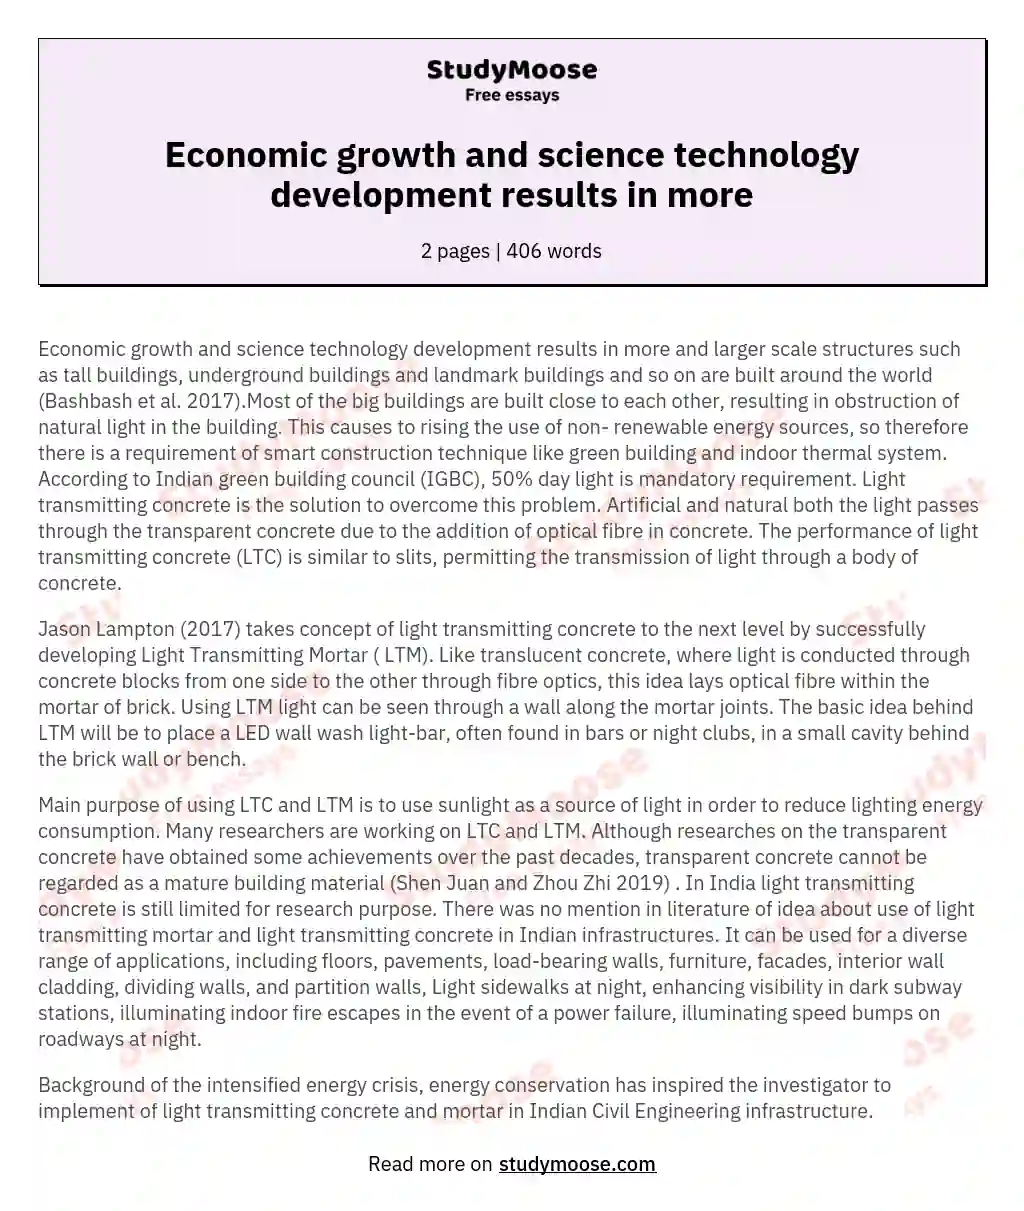 Economic growth and science technology development results in more